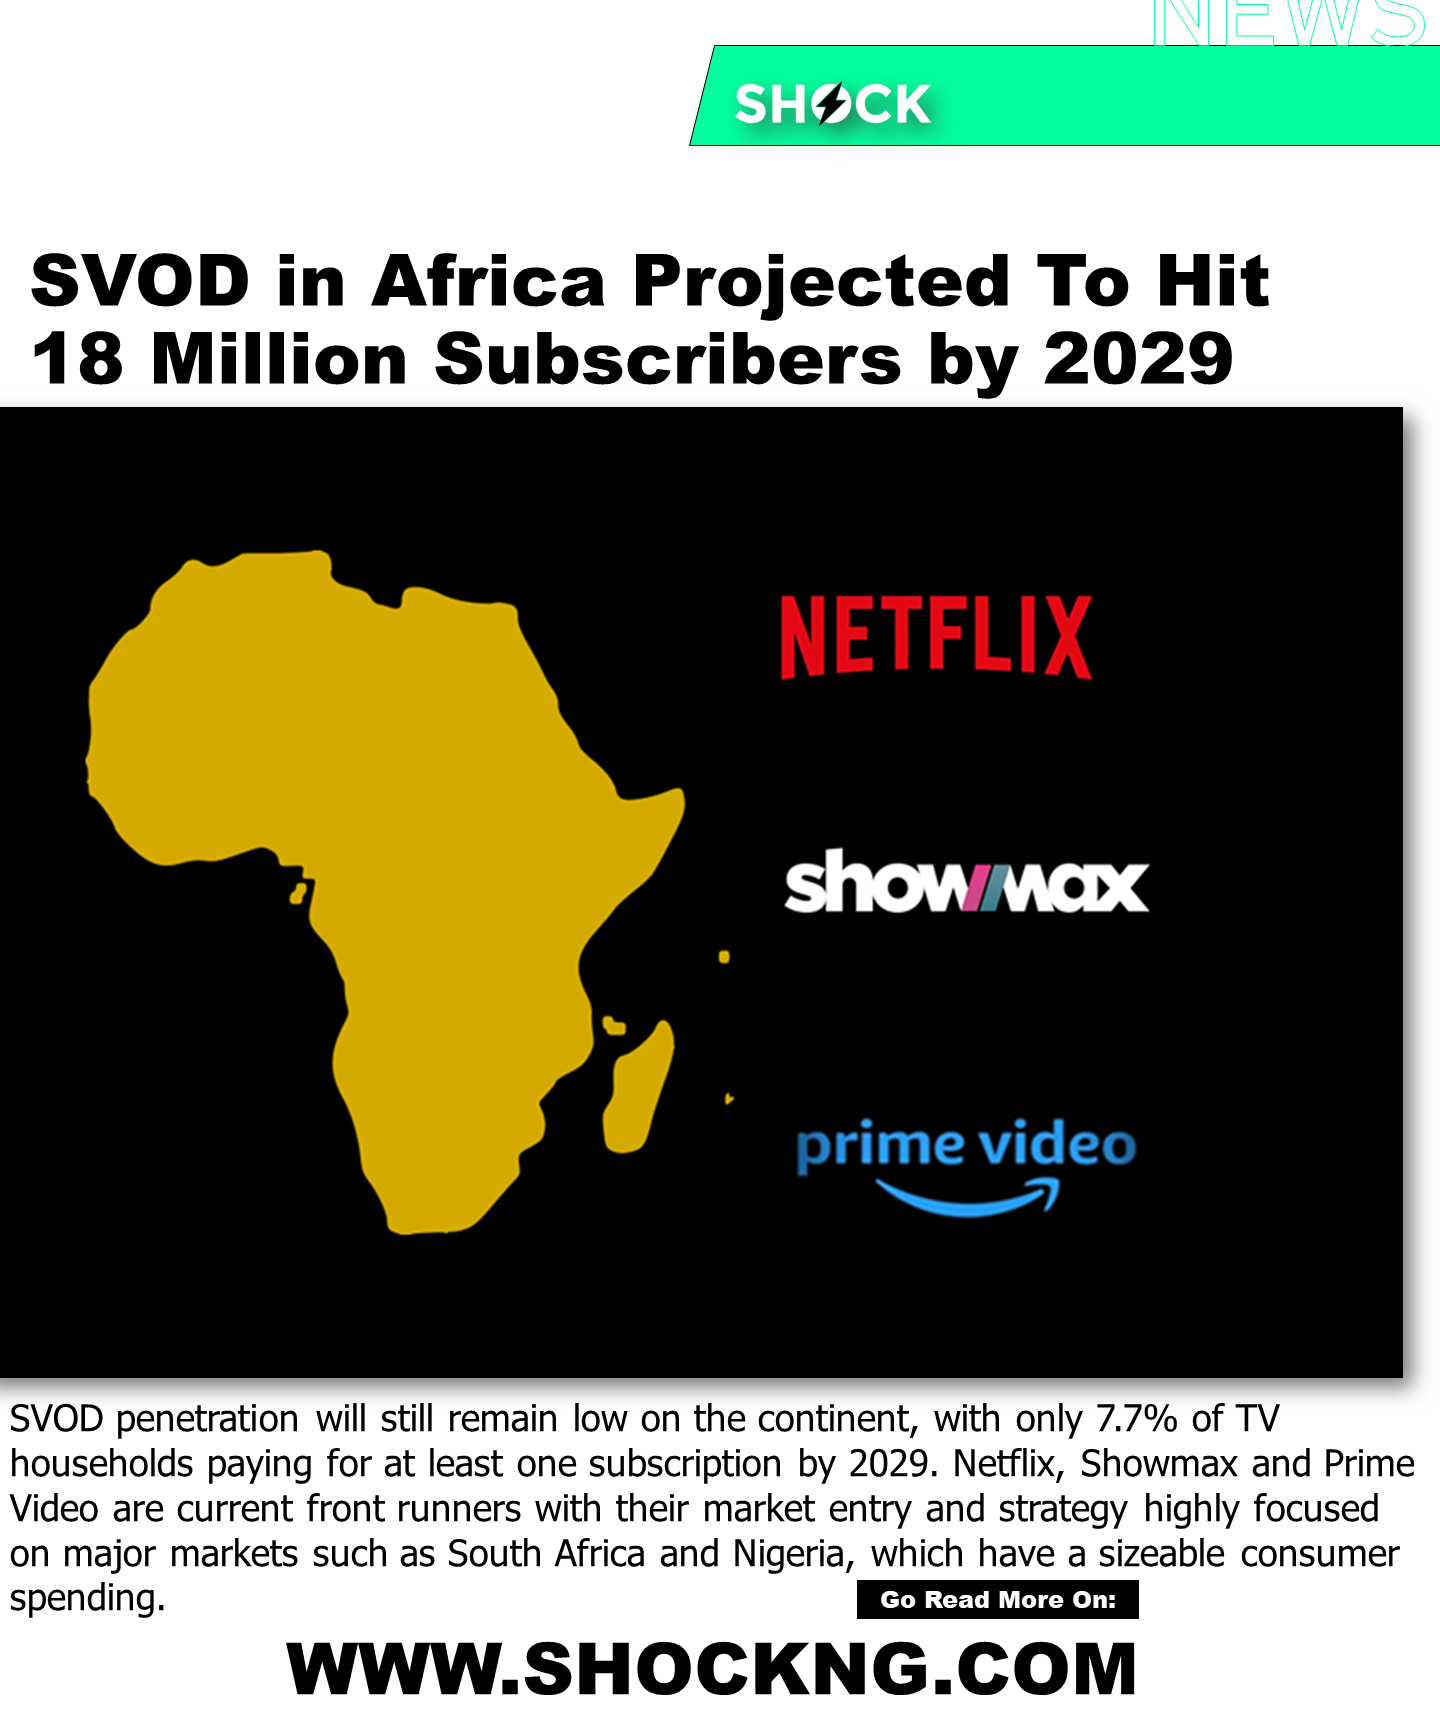 Nigerian Netflix Prime Video Originals - SVOD in Africa Projected To Hit 18 Million Subscribers by 2029